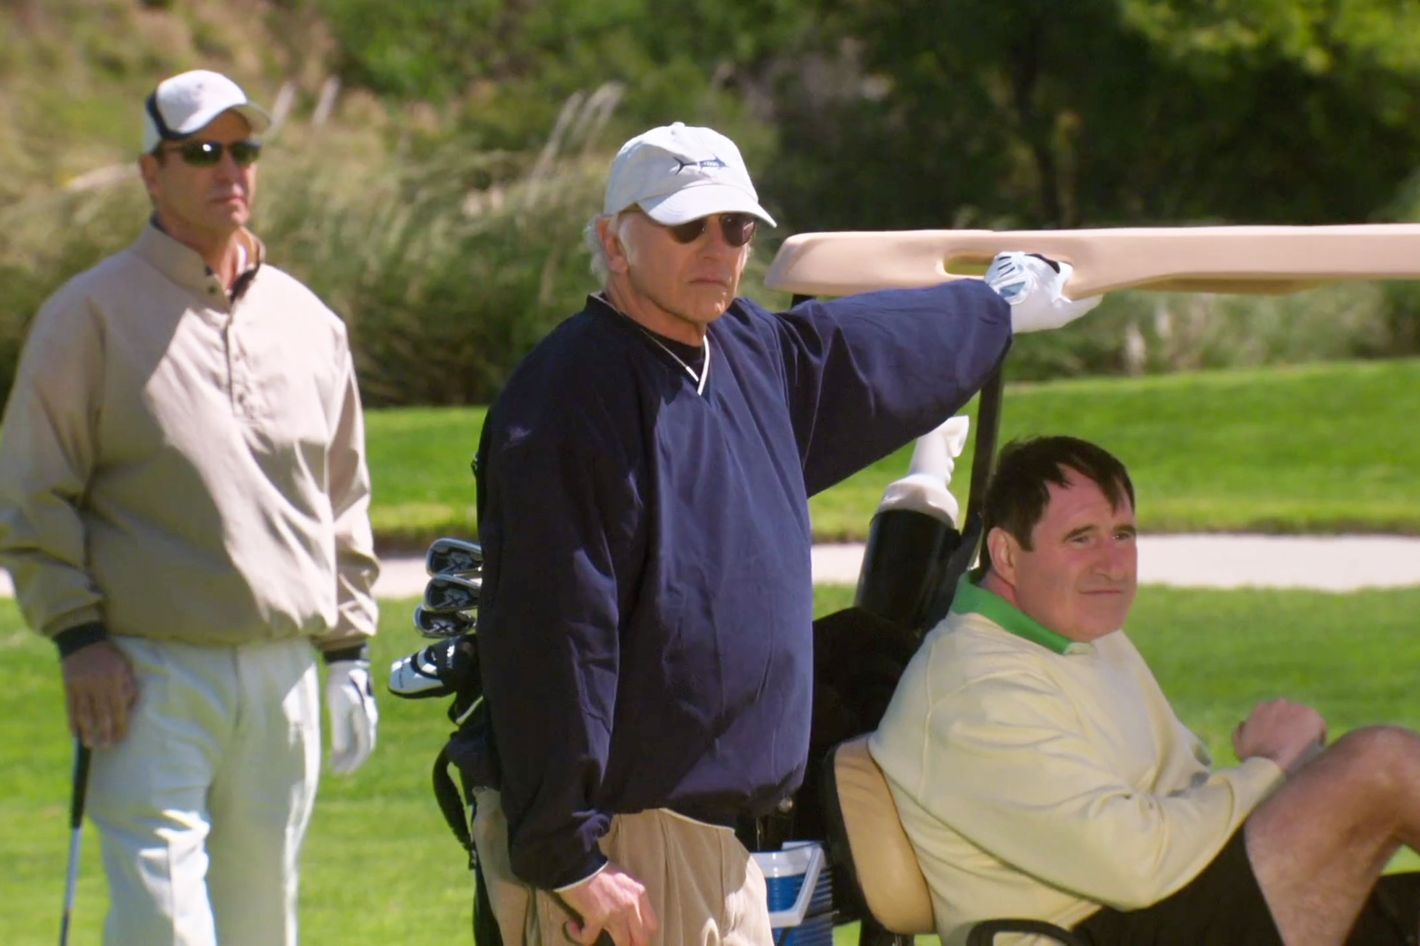 Curb Your Enthusiasm Larry Davids Normcore Golf Looks pic